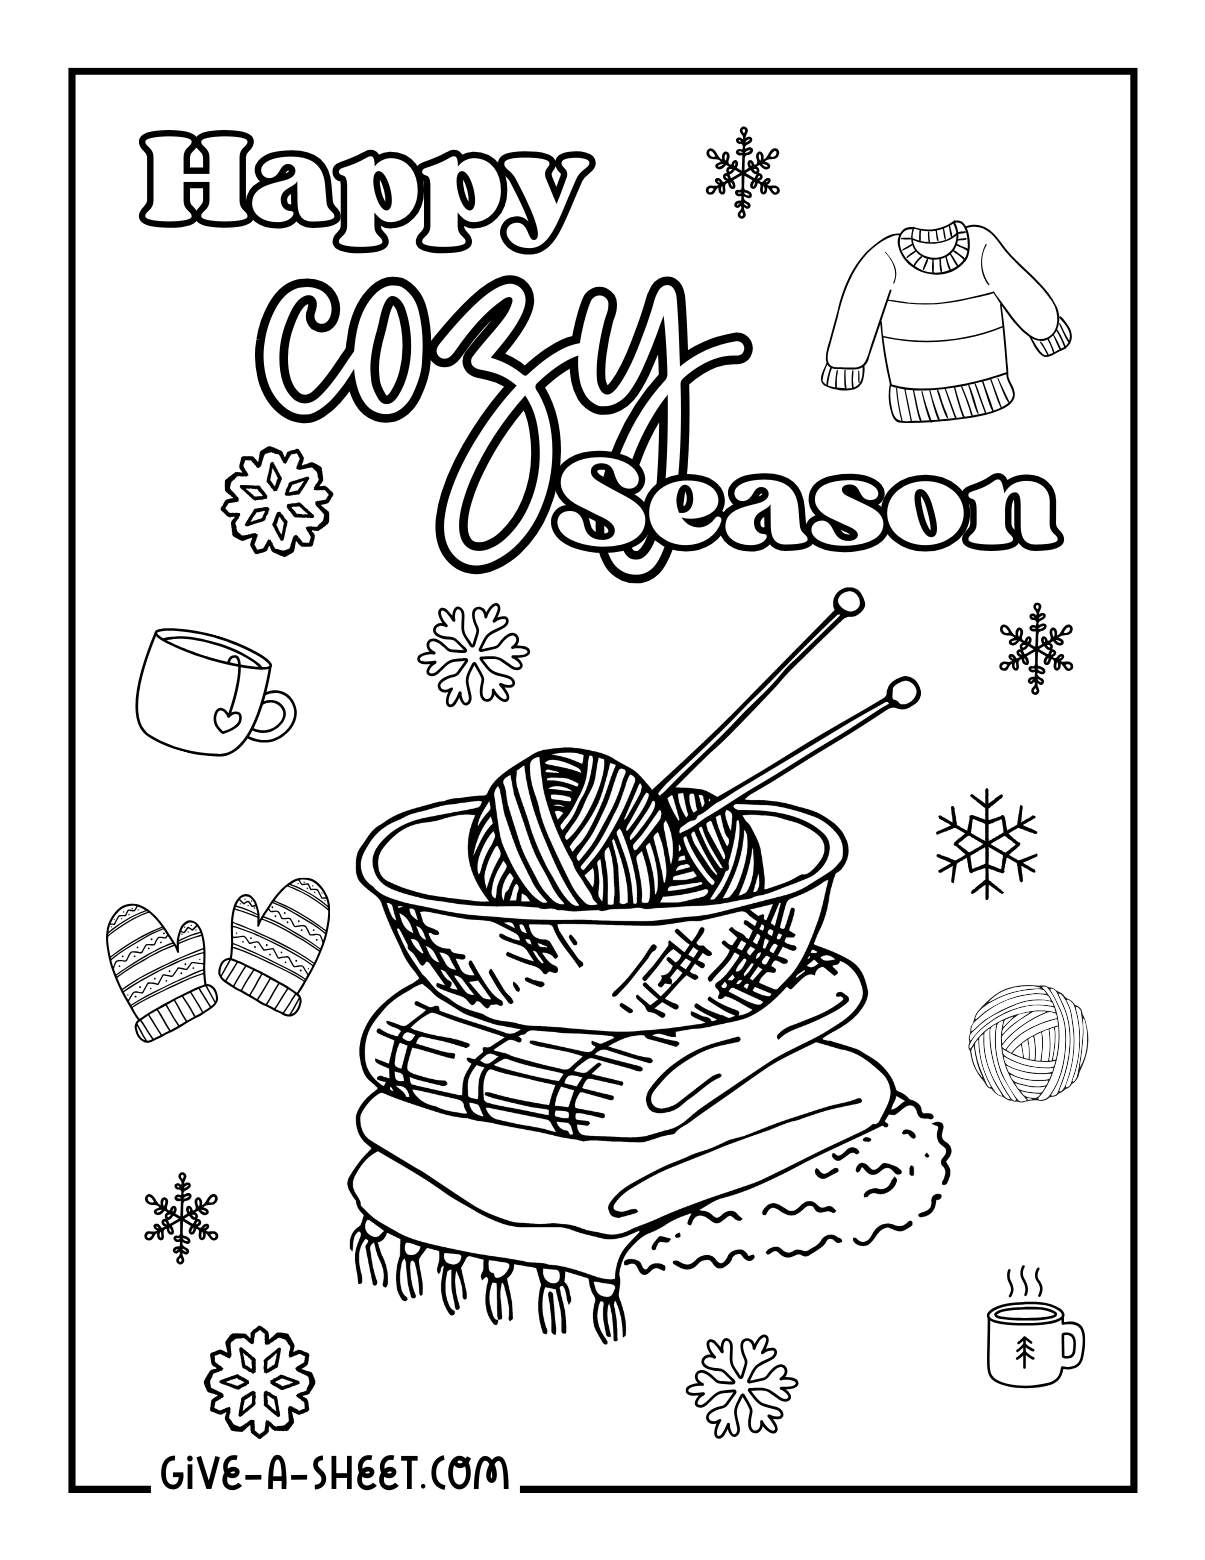 Knitwear, sweater, mittens knitting projects coloring page.